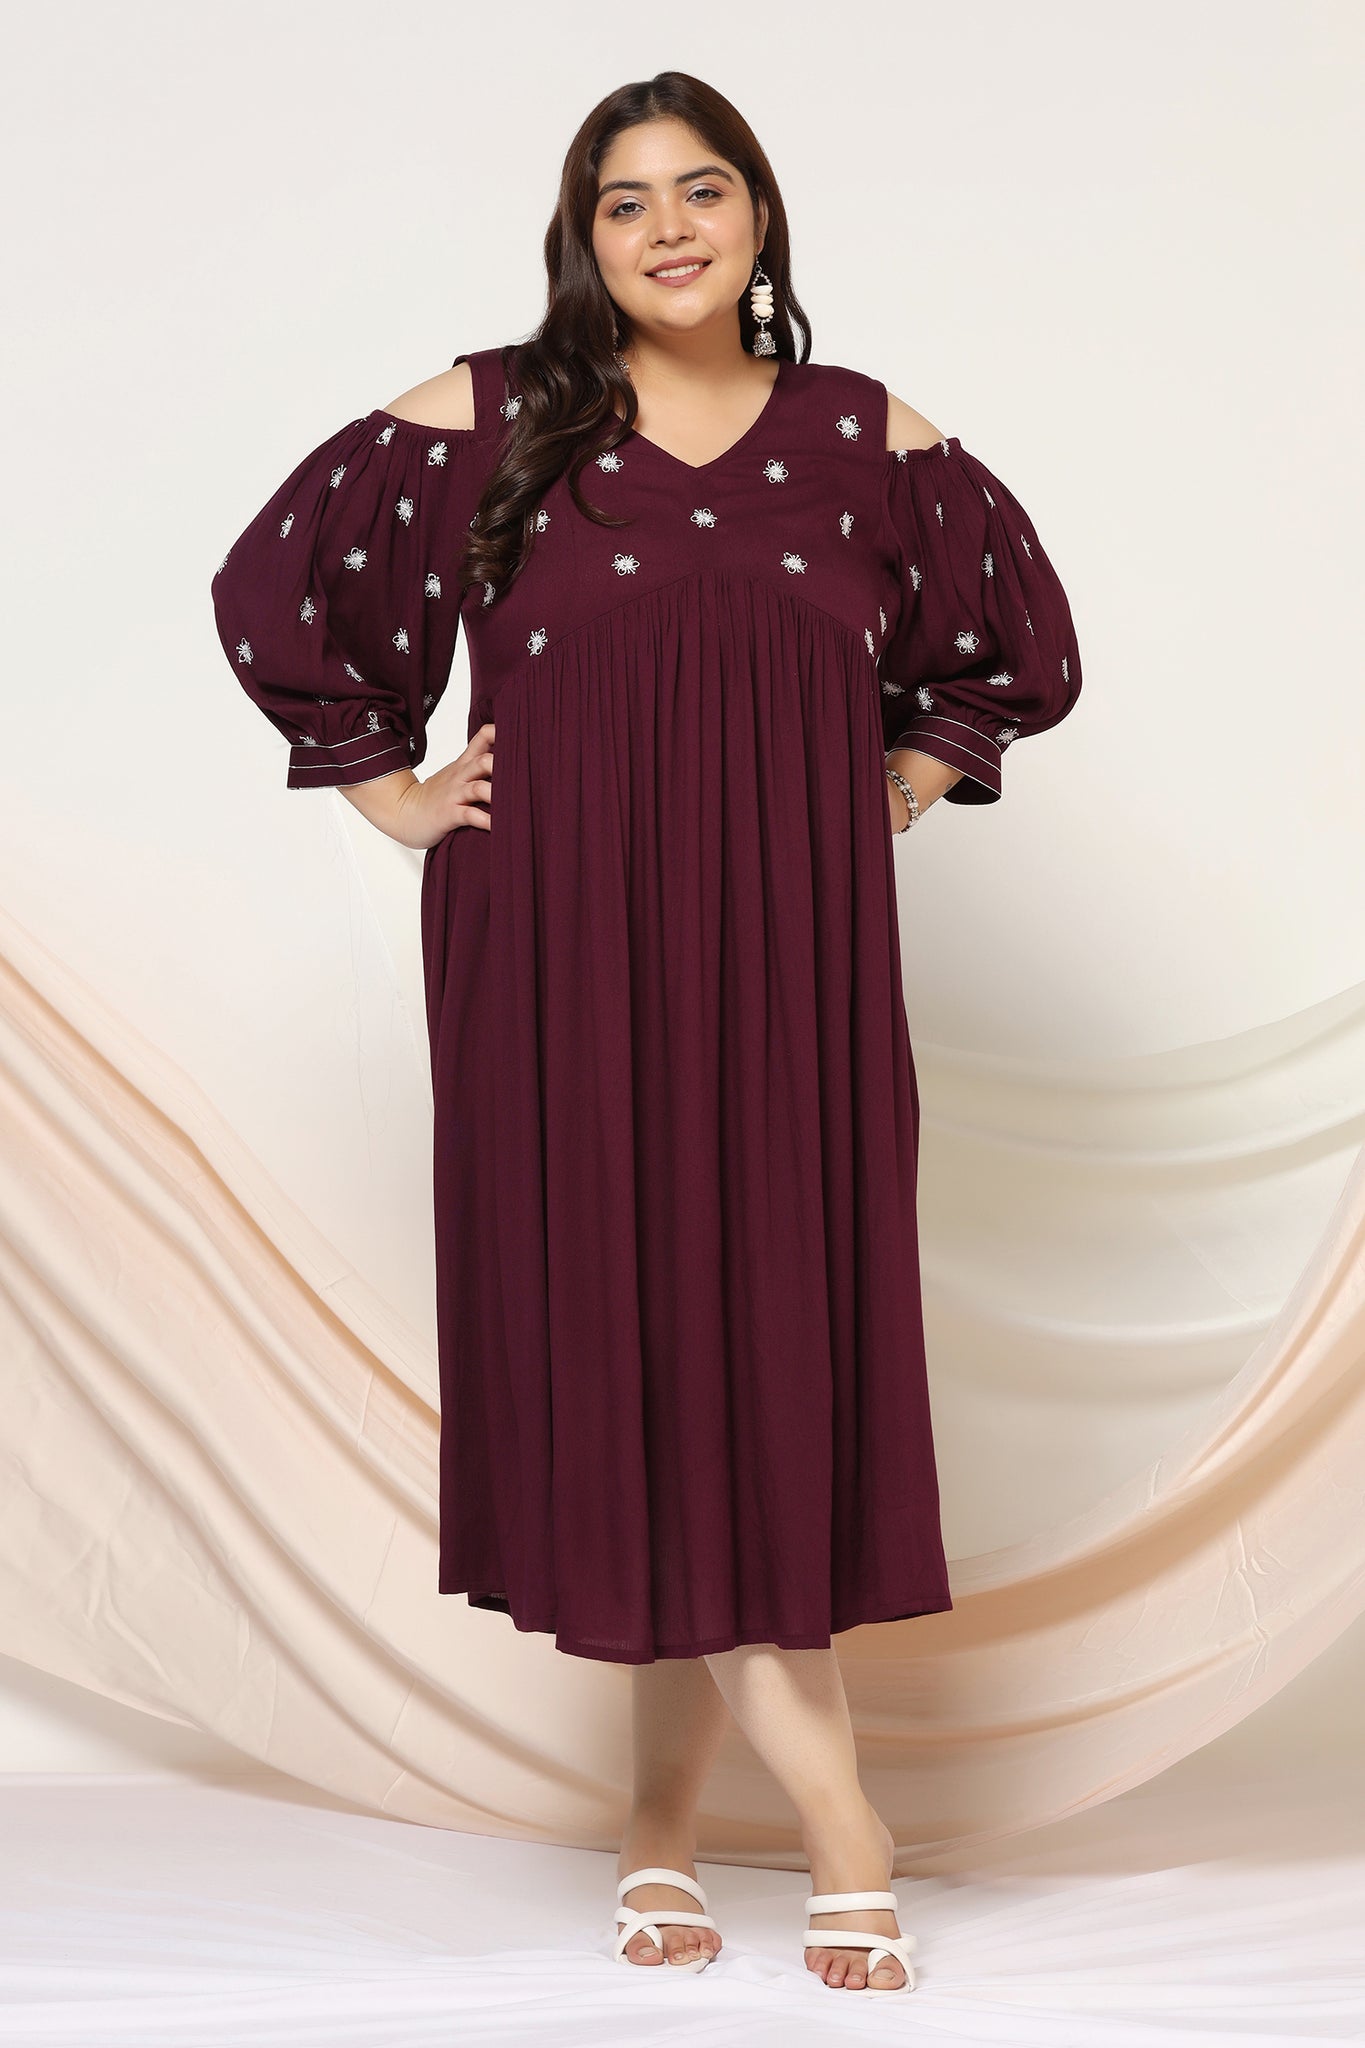 Womens Plus Size Wine Rayon Embroidered Empire Dress